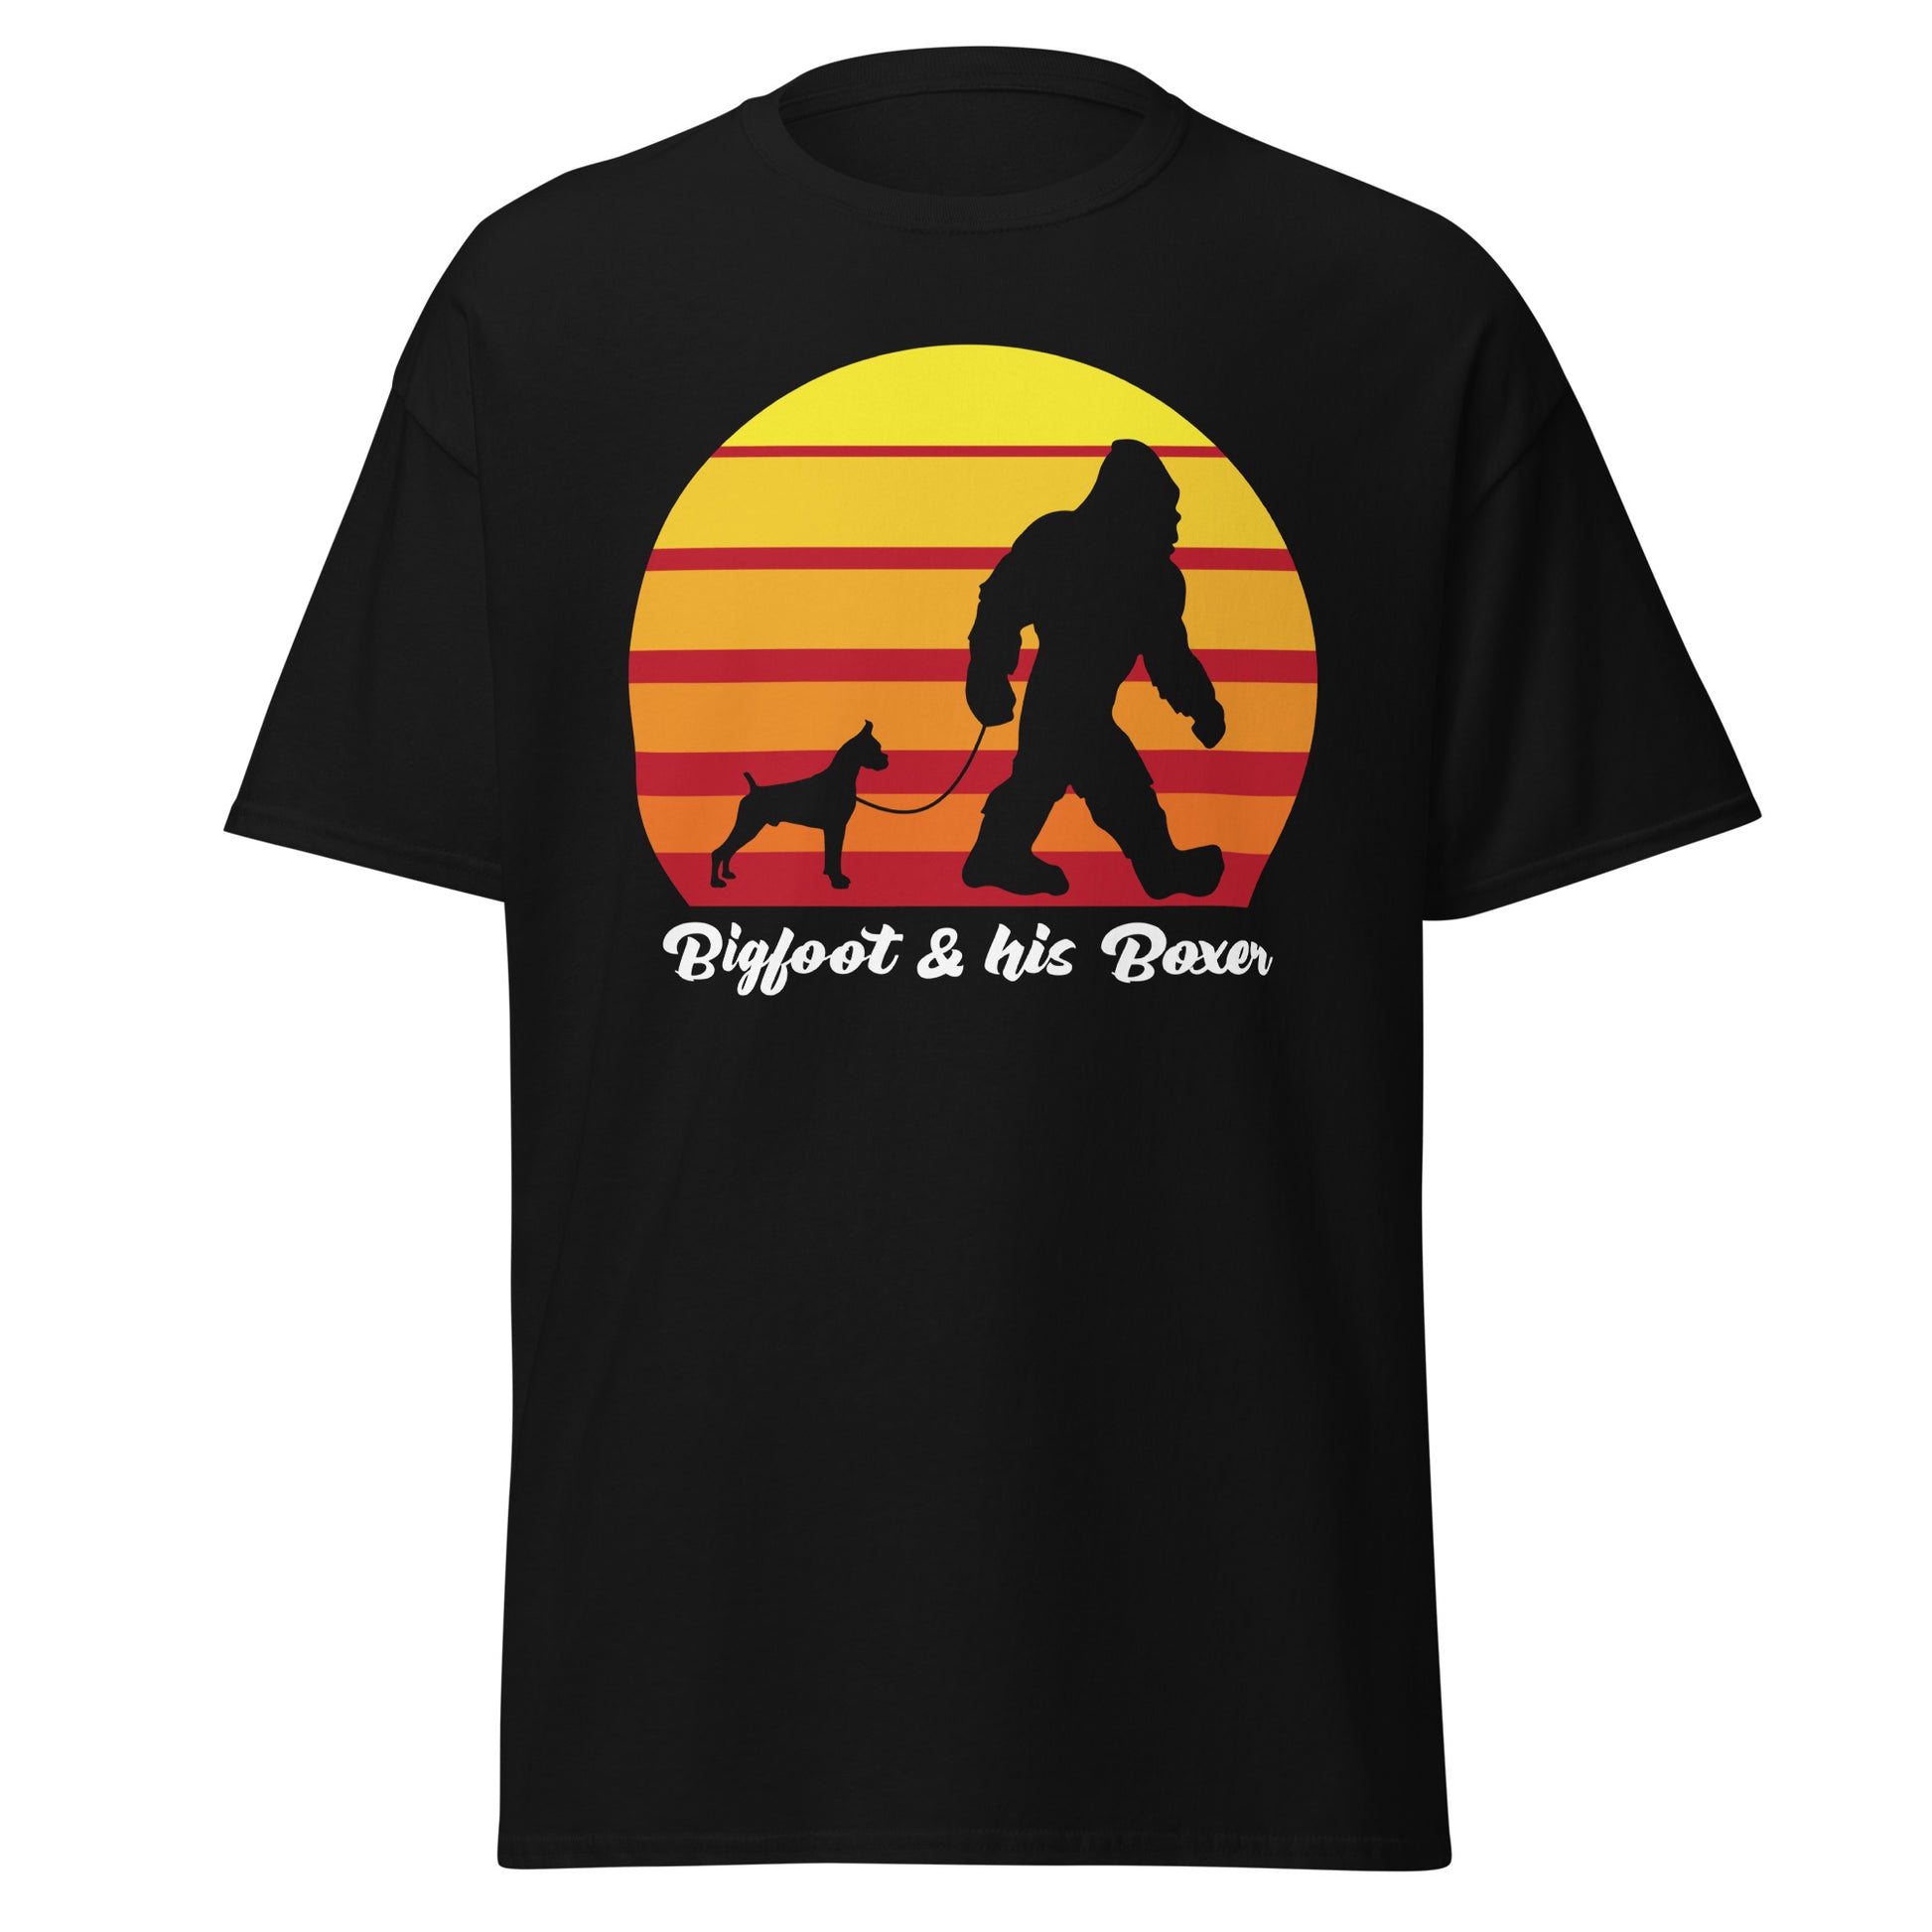 Big foot and his Boxer men’s black t-shirt by Dog Artistry.